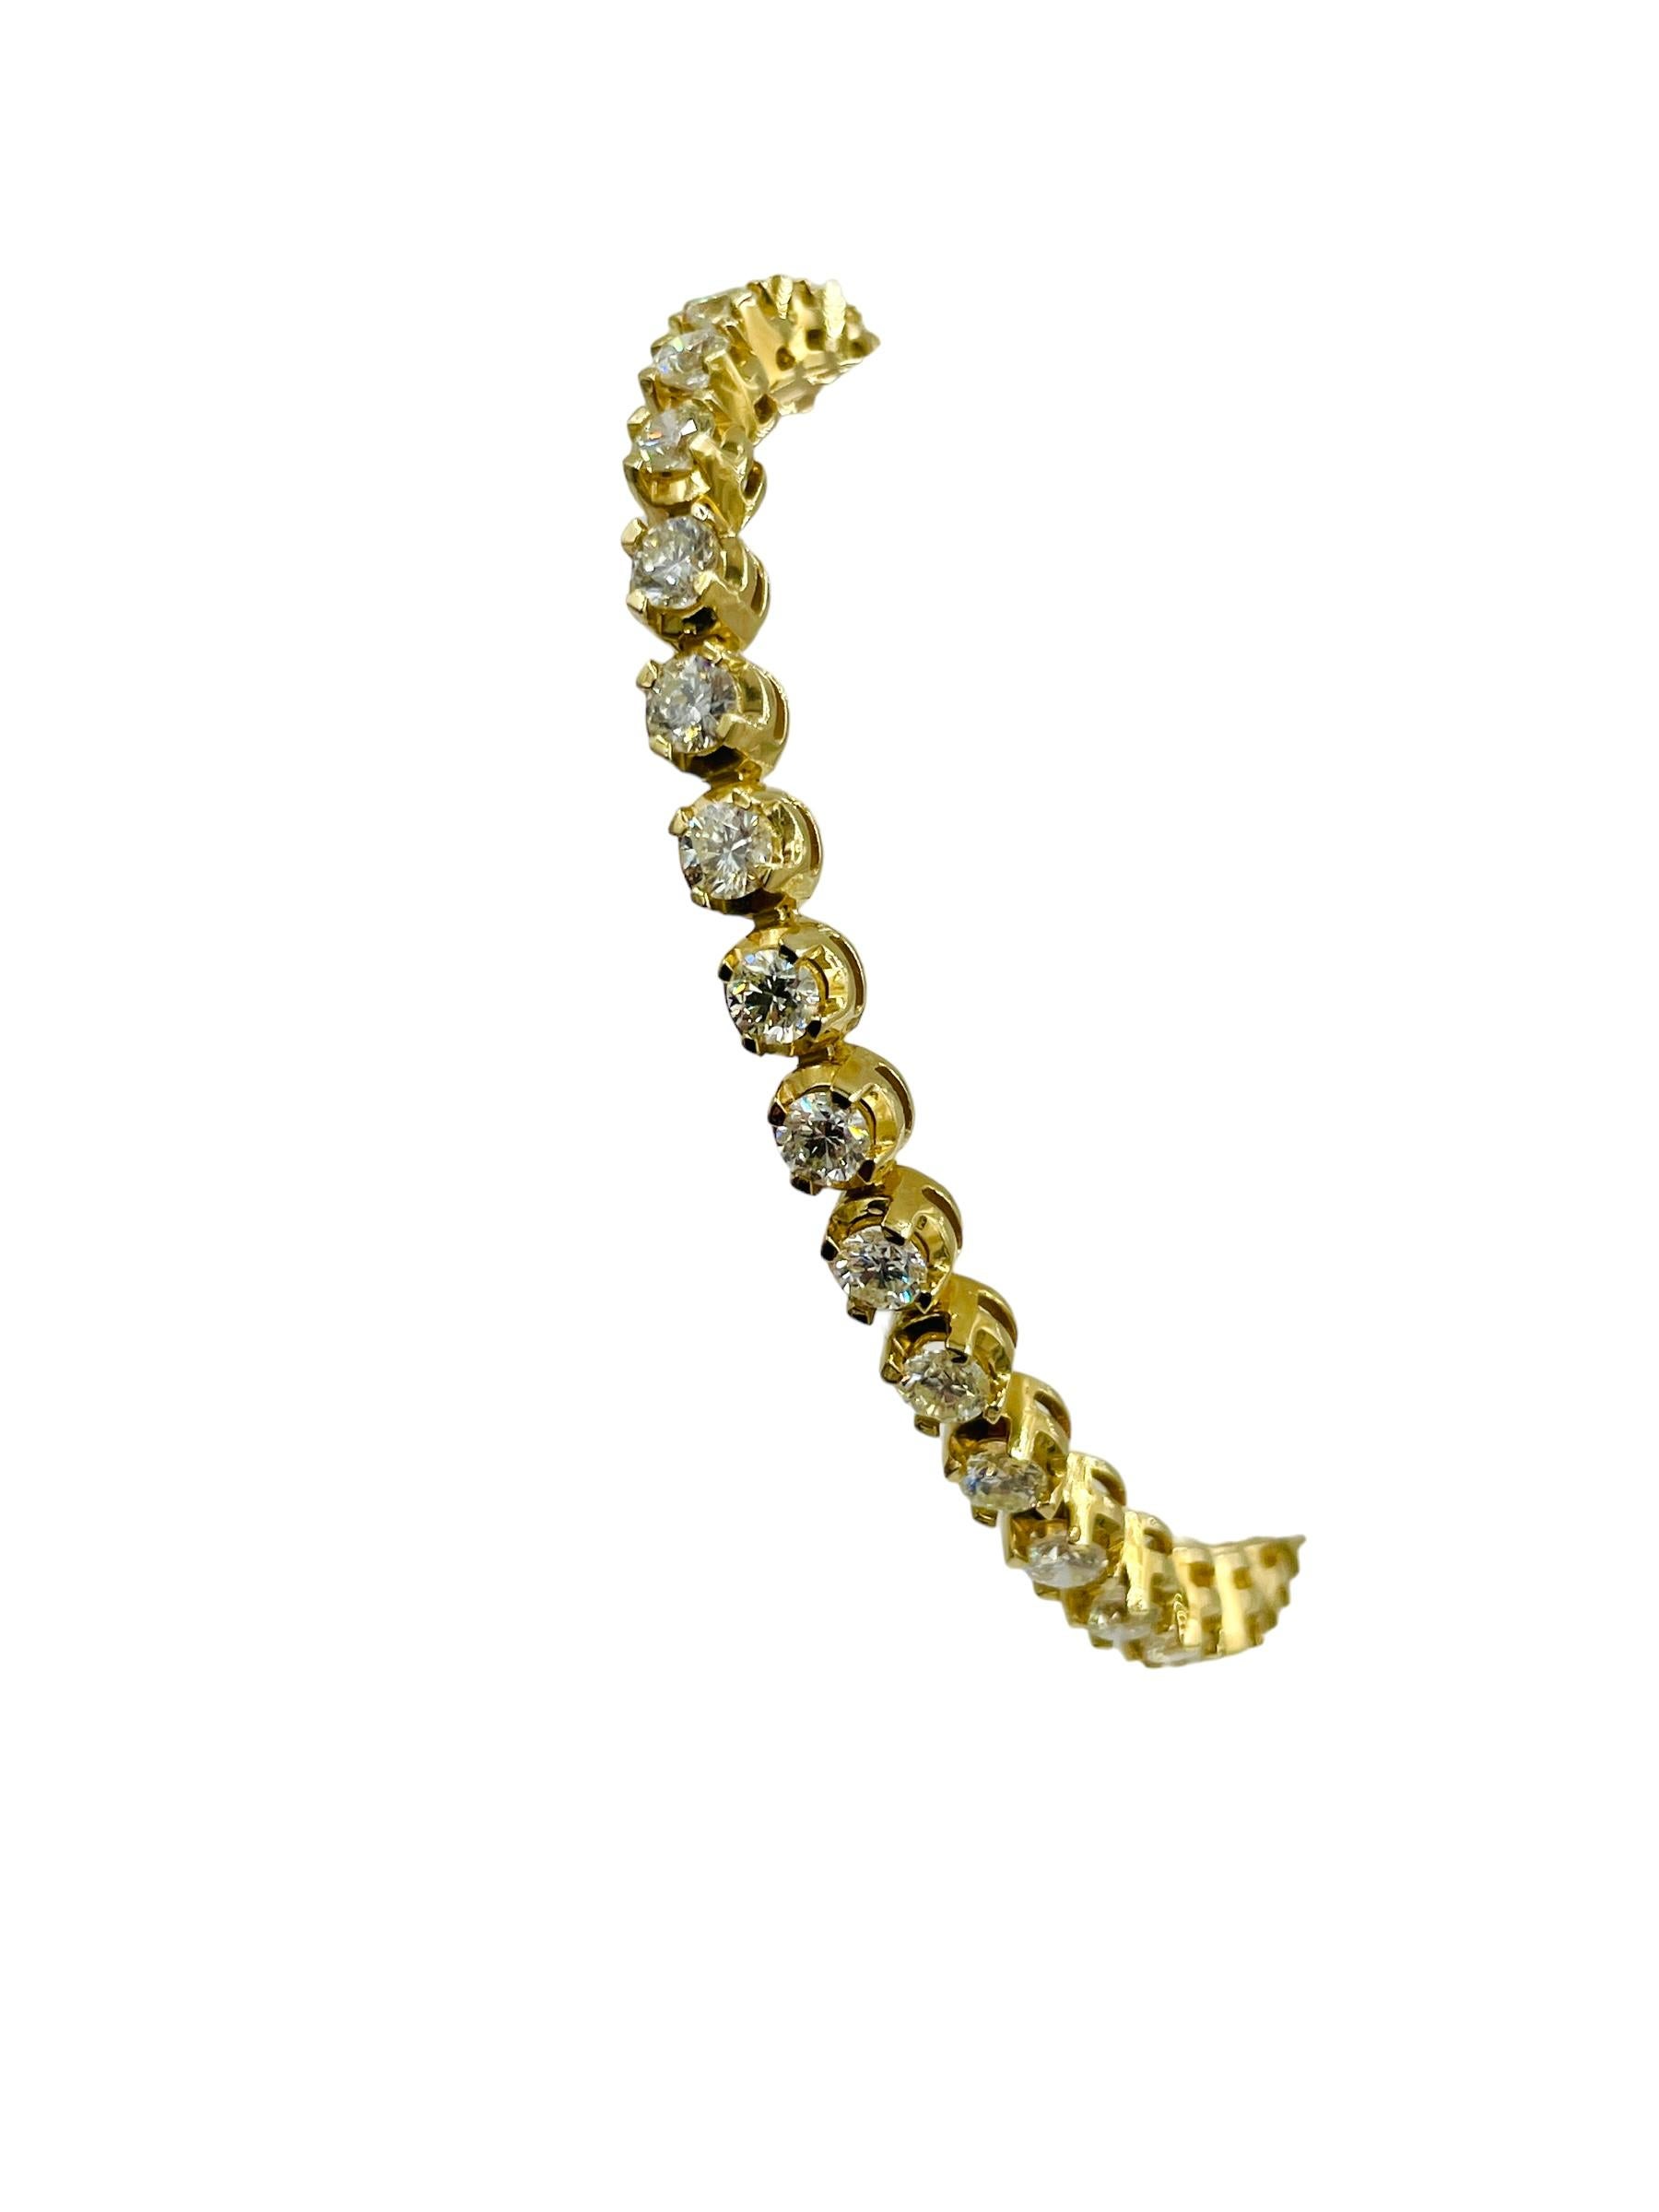 Contemporary Diamond Yellow Gold Tennis Bracelet 6 1/2 Inches Long For Sale